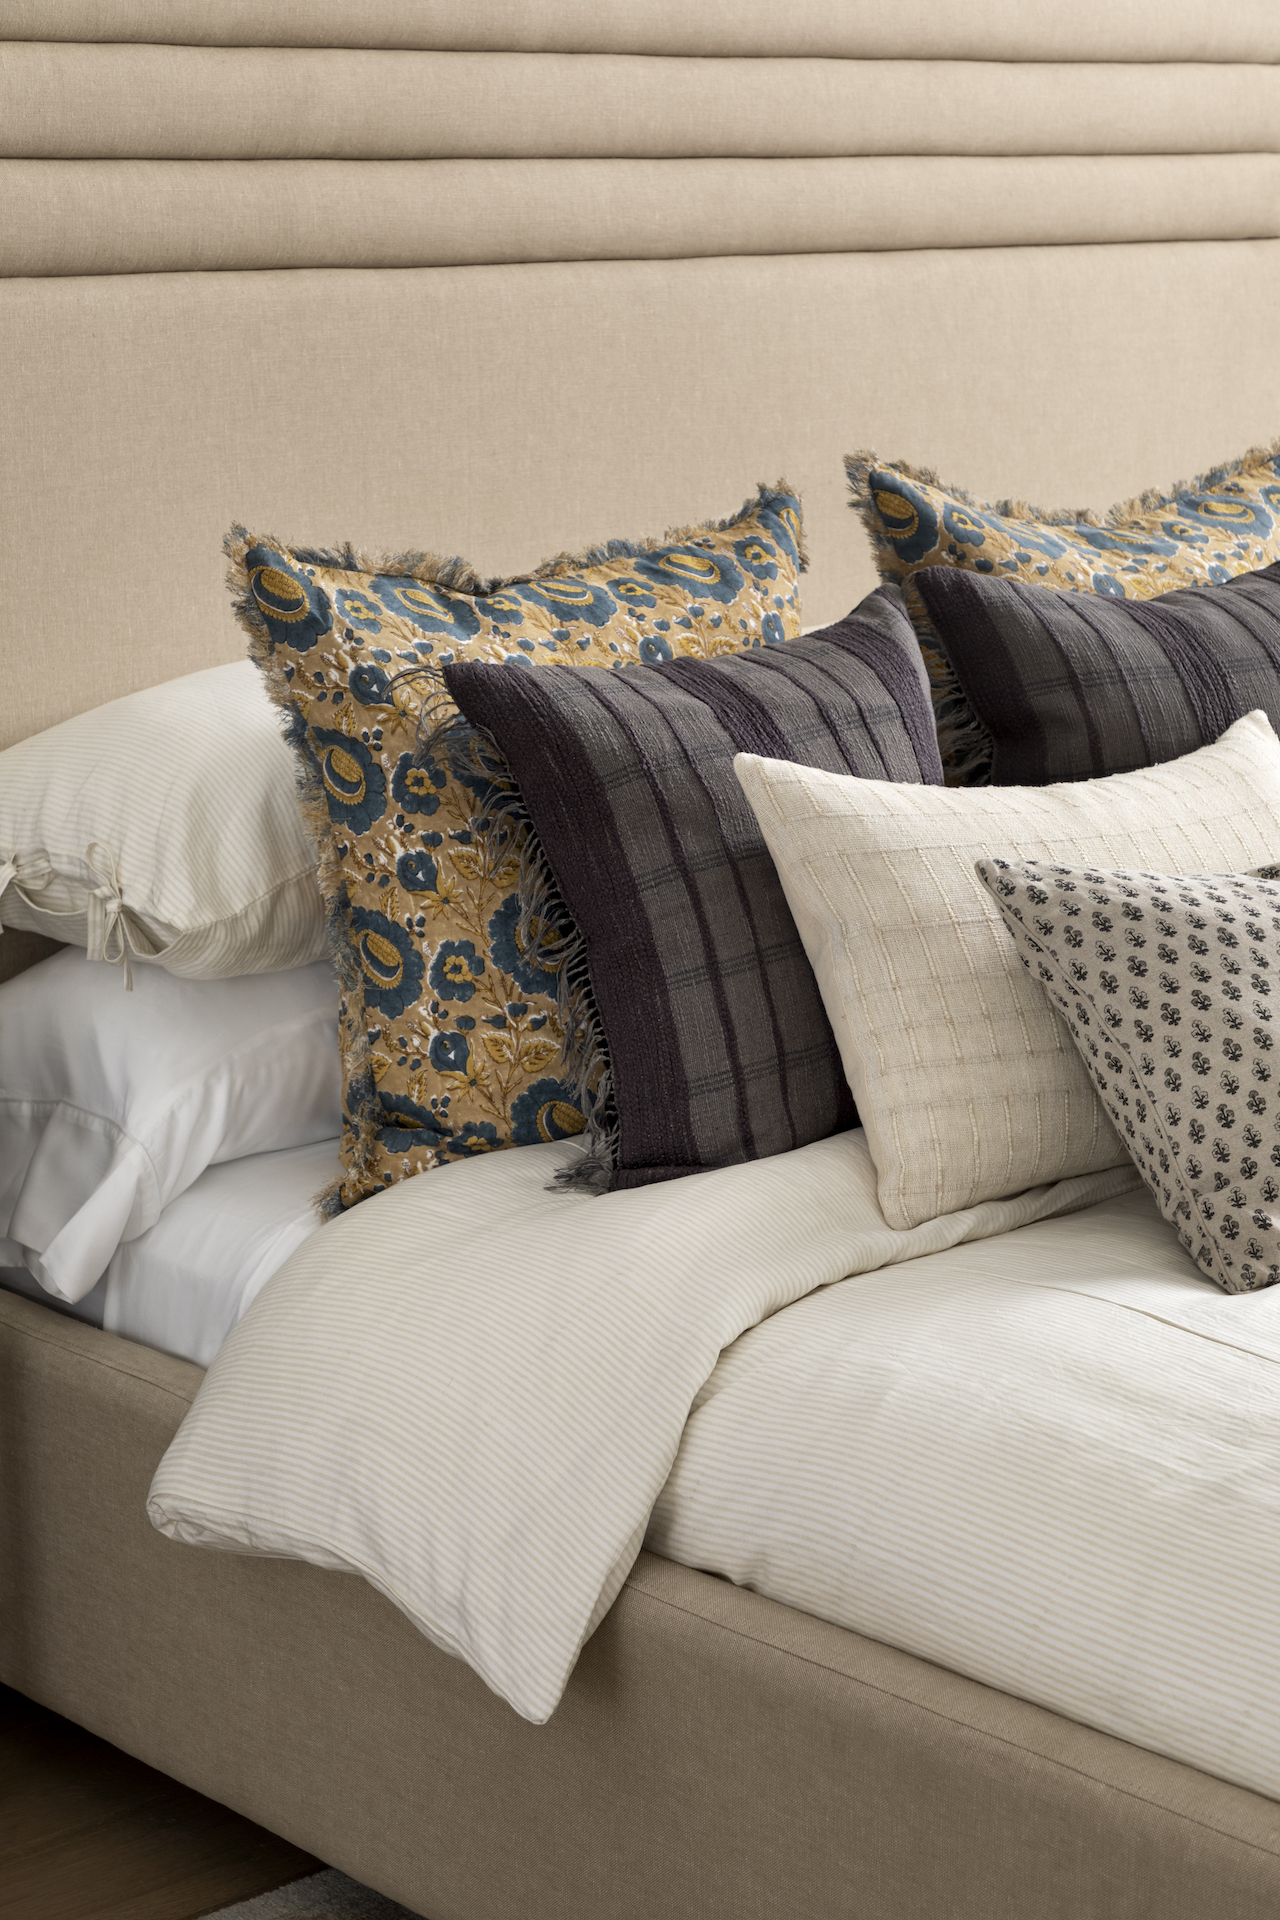 Upholstered bed with a mix of patterned pillows